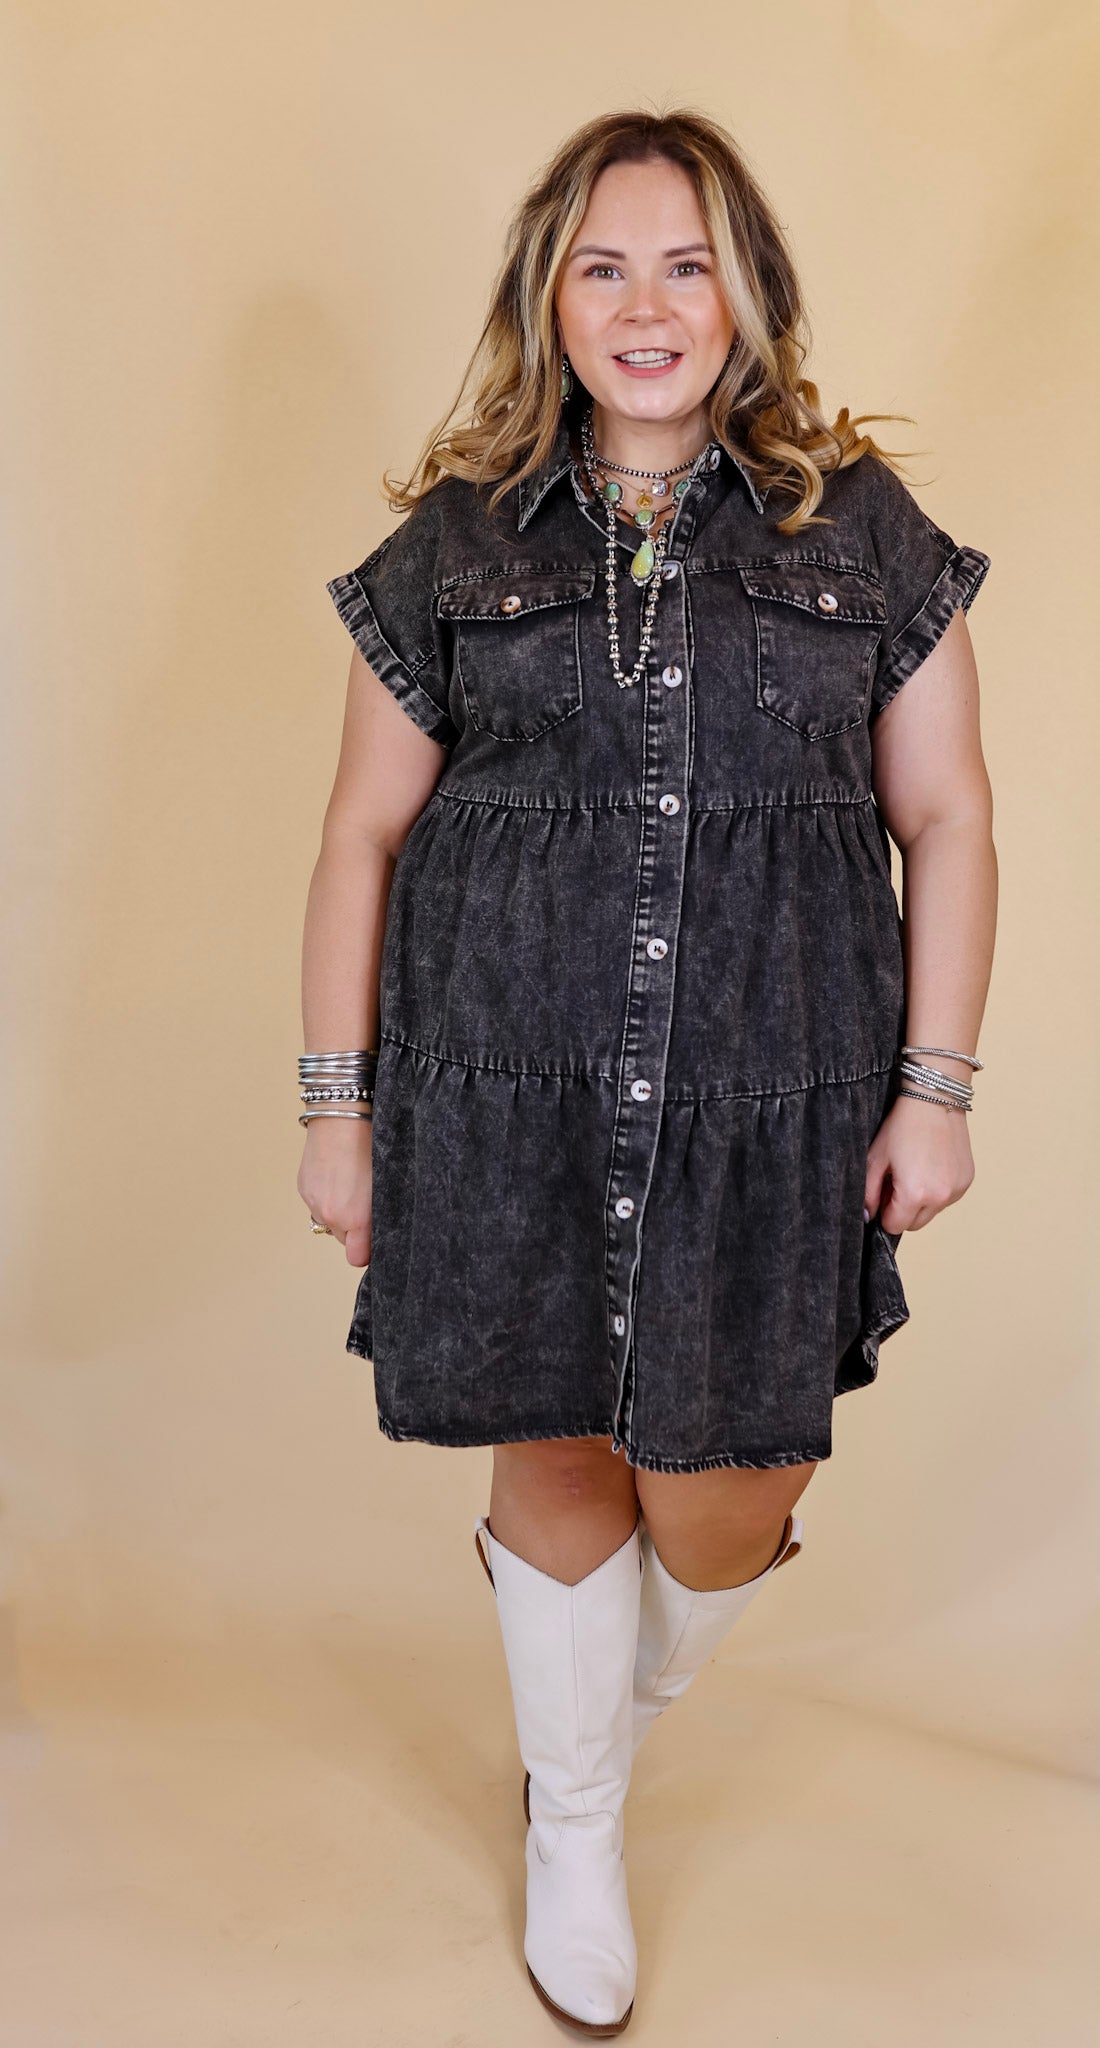 Latest Obsession Button Up Denim Tiered Dress in Black - Giddy Up Glamour Boutique